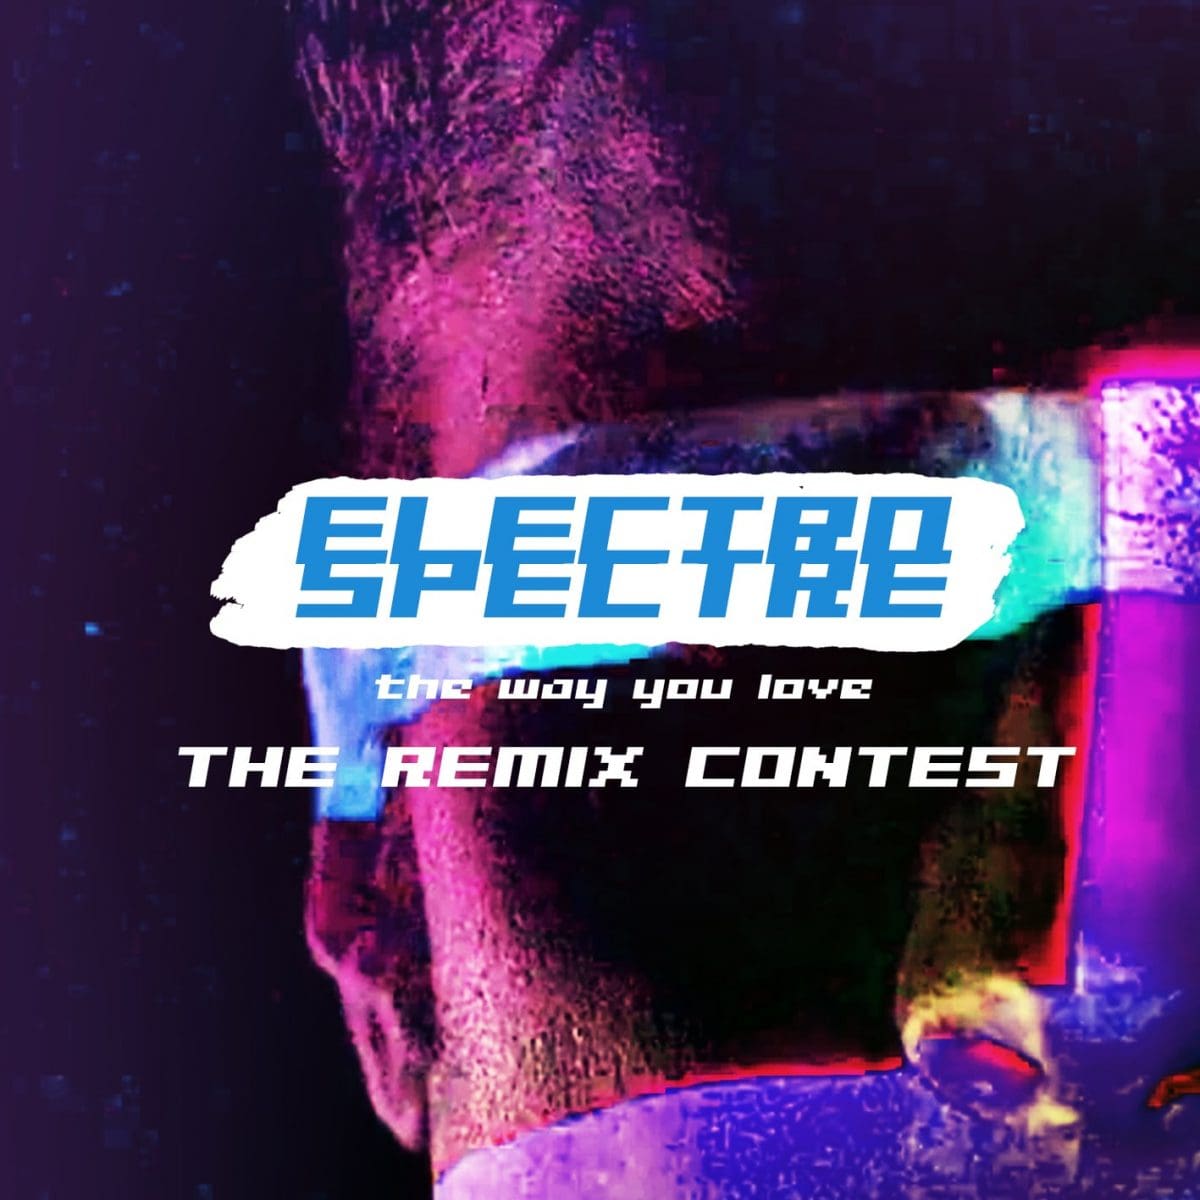 Electro Spectre - The way you love - The Remix Contest